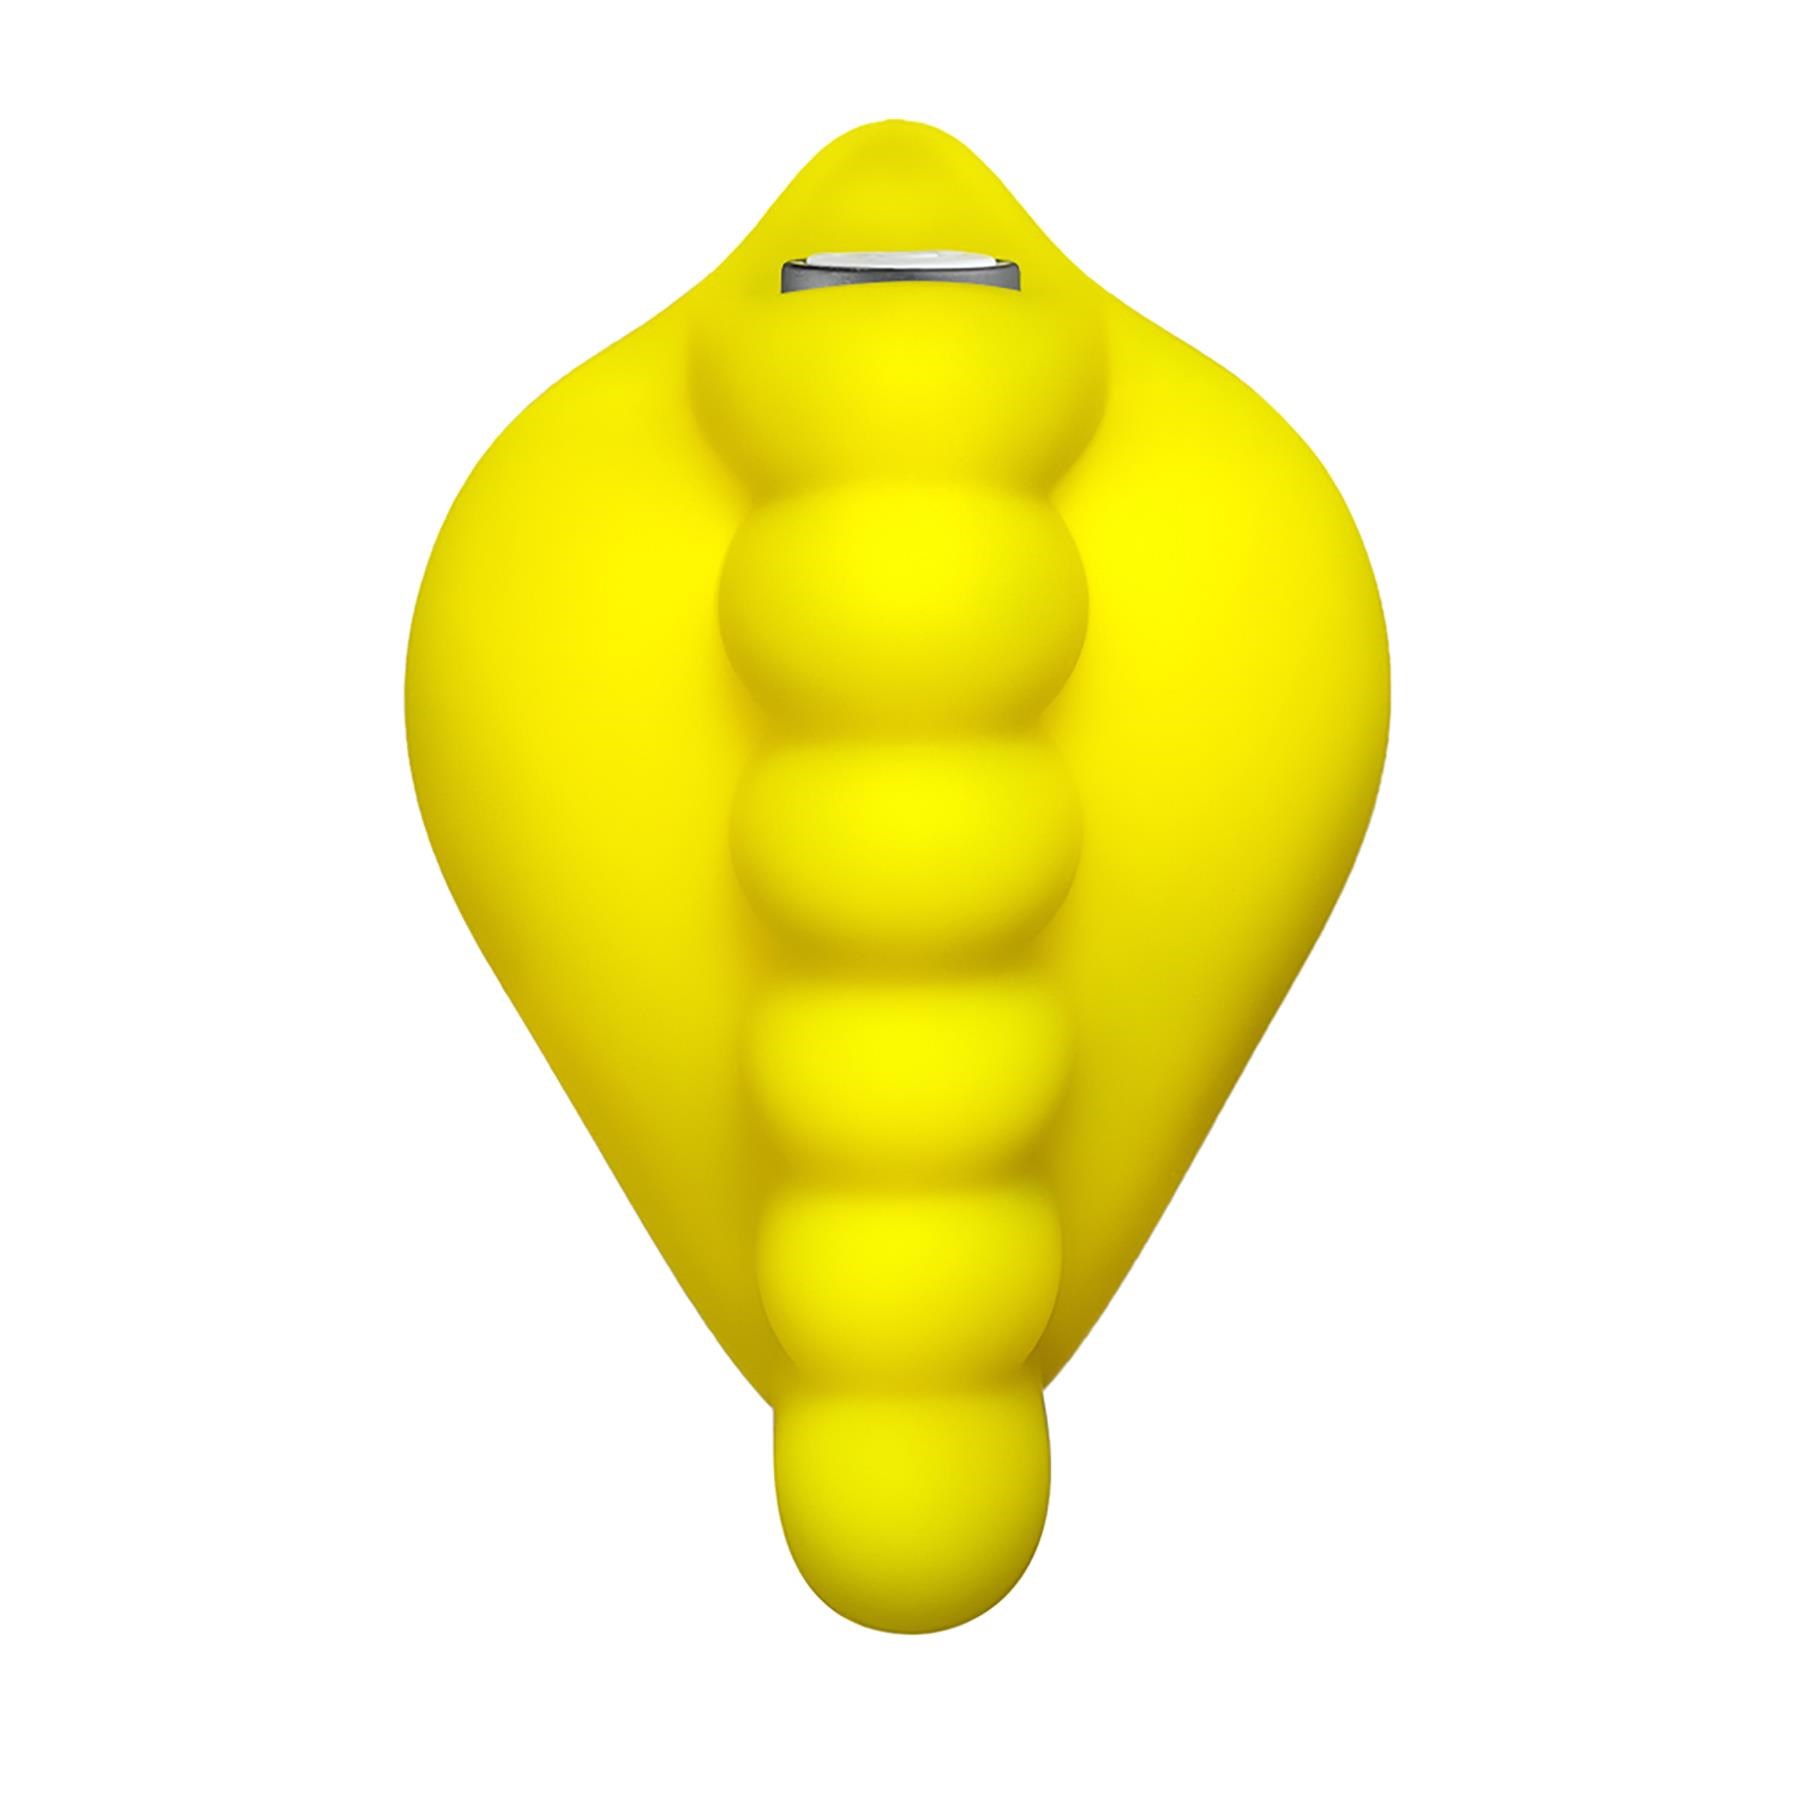 Banana Pants Honey Bunch Dildo Grinder Cushion With Bullet (Bullet Not Included)